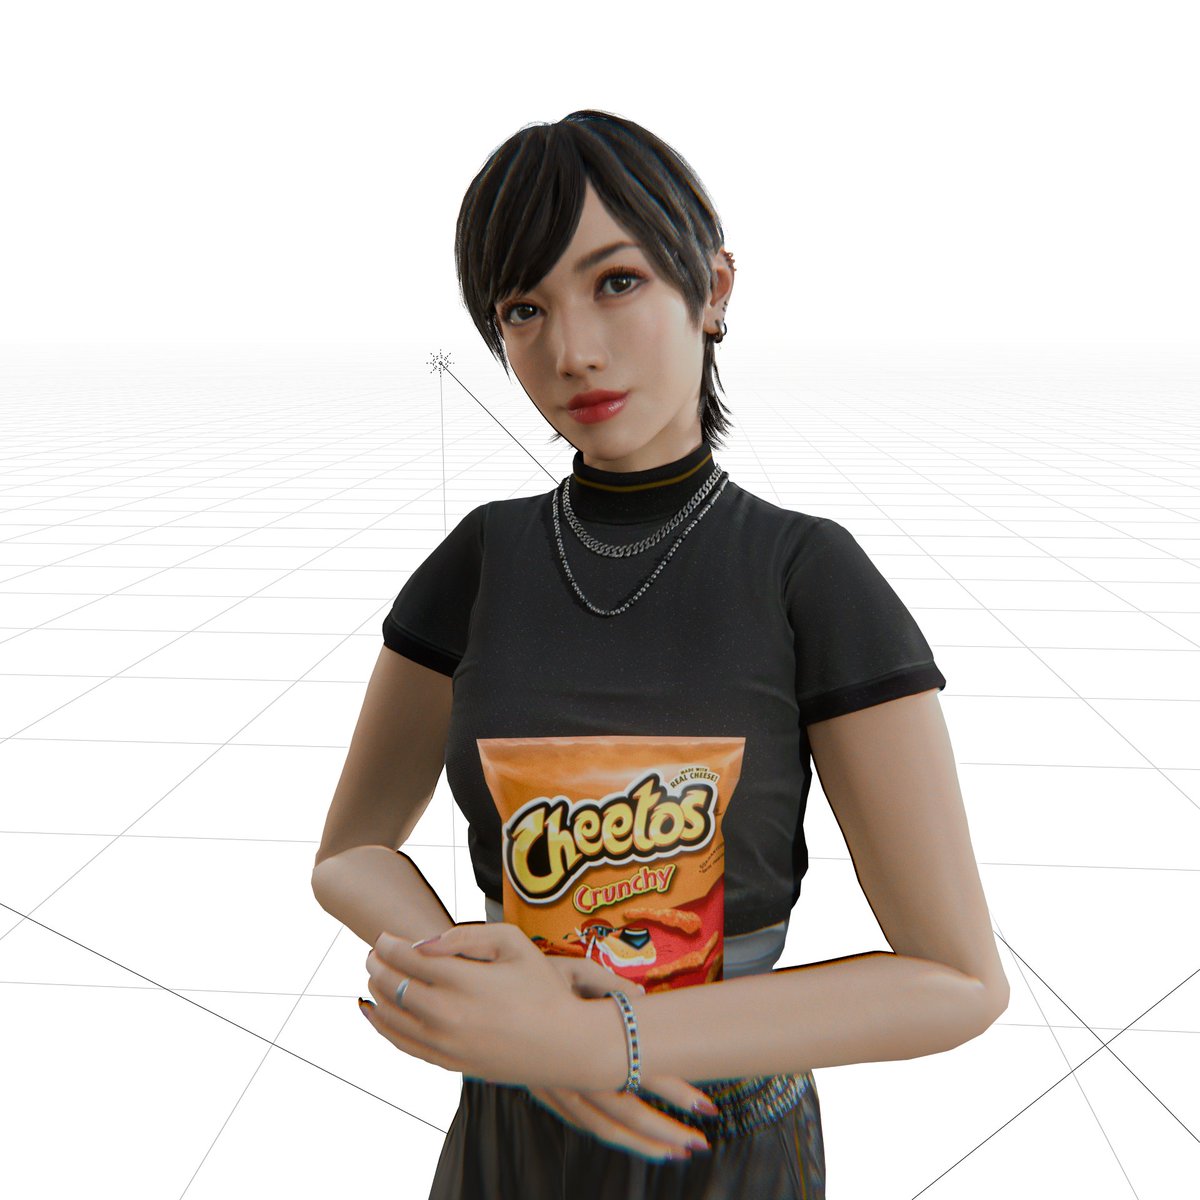 my discord friend keeps calling Chitose 'Cheetoes' so i made this lmfao (he lost it) anyways goodnight! 

#LikeaDragon #Yakuza #LikeaDragon8 #LikeaDragonInfiniteWealth #ChitoseFujinomiya 

thx again to the goat @Z64Gaming  for the model